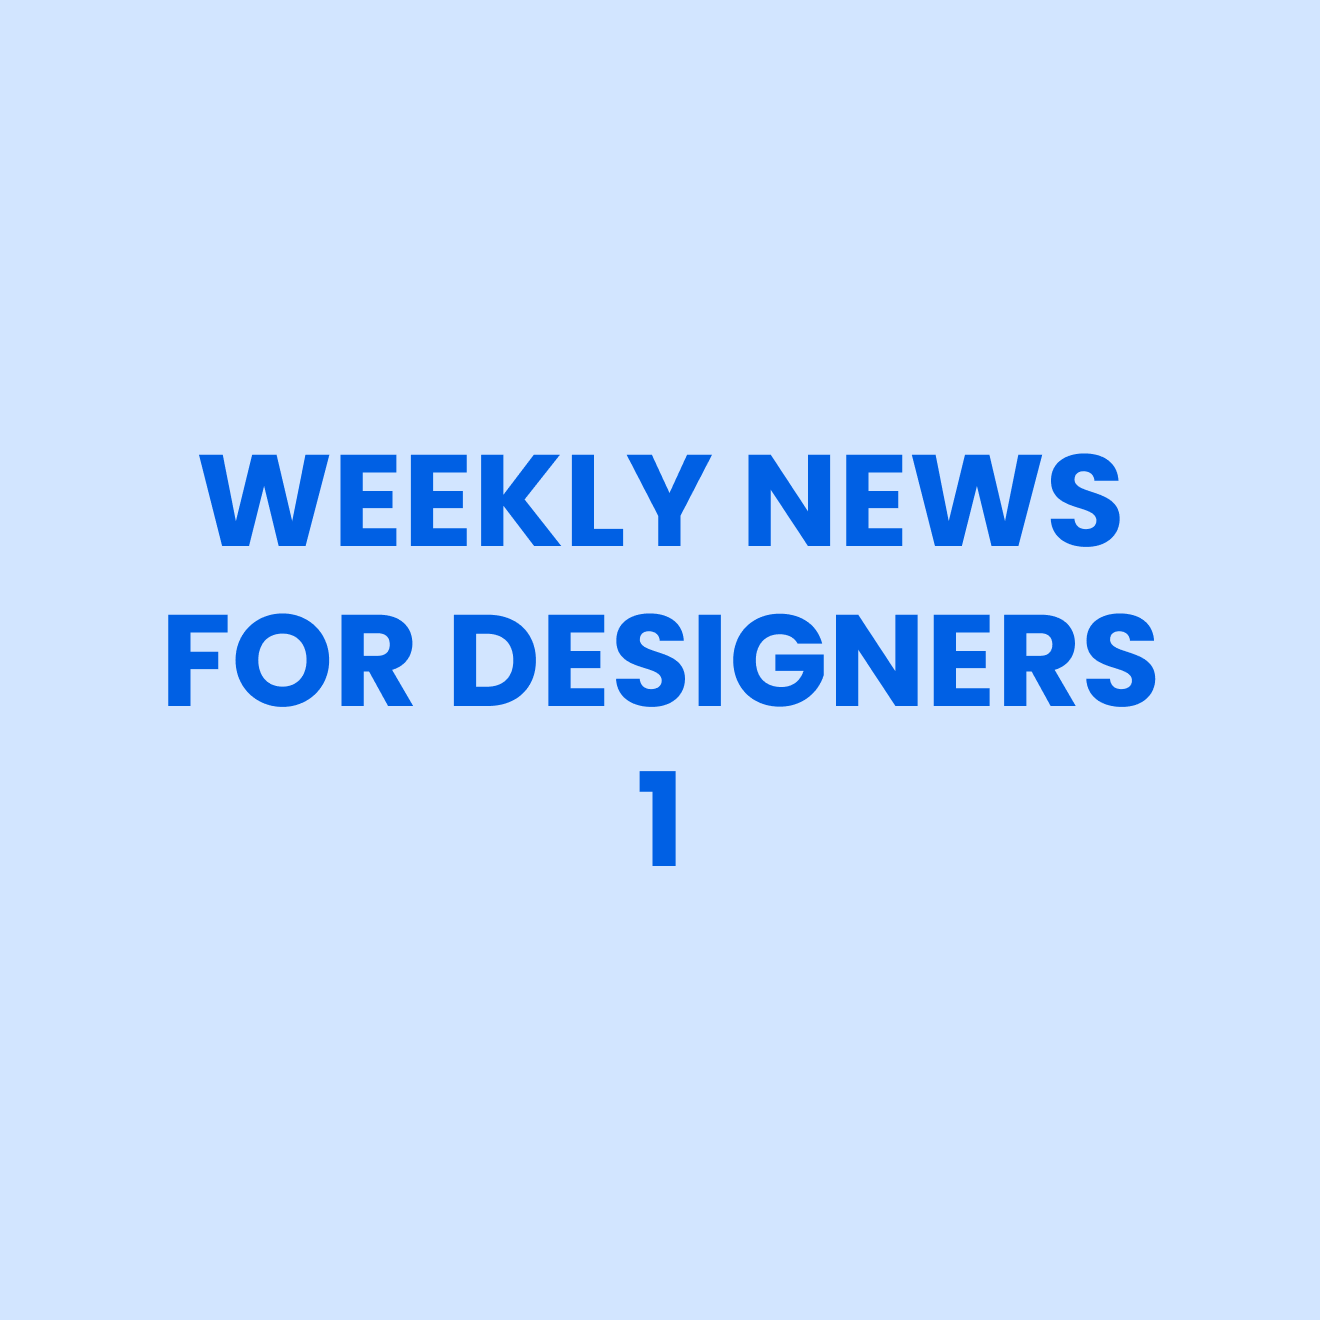 Weekly news for designers – 1